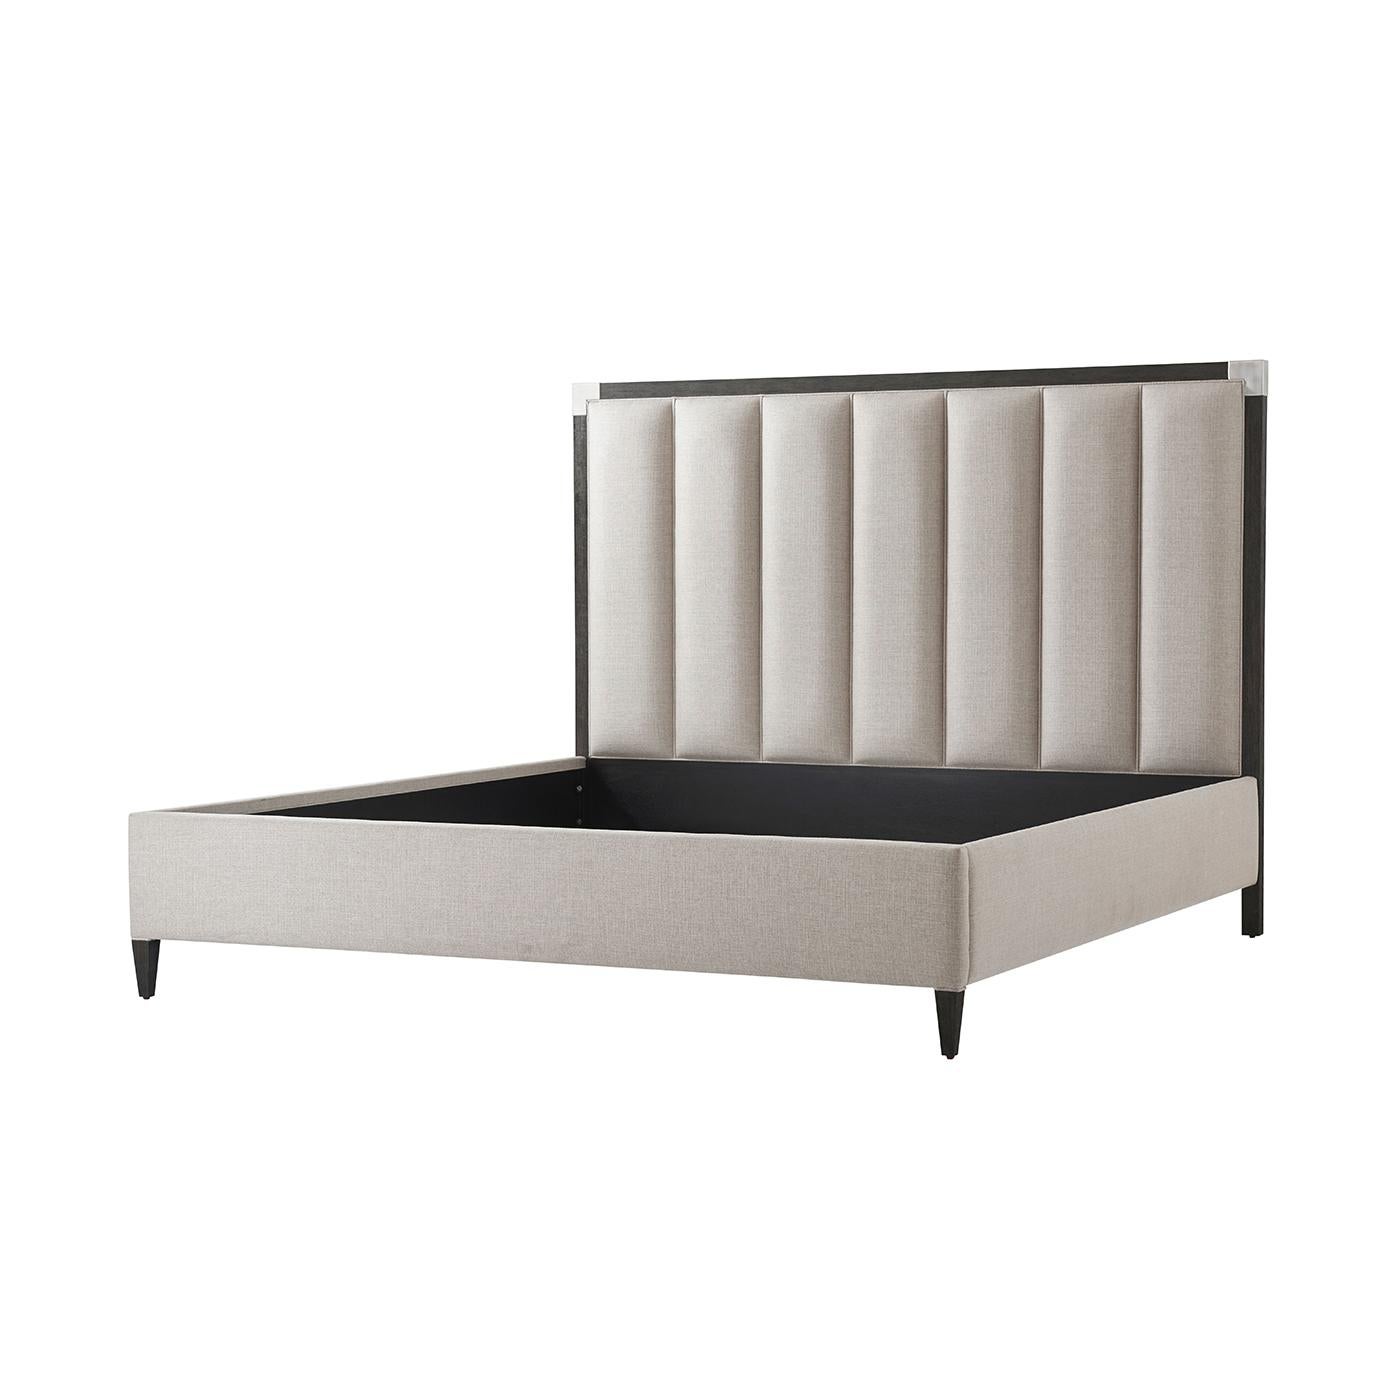 Vietnamese Art Deco Style King Size Bed, Nickel For Sale